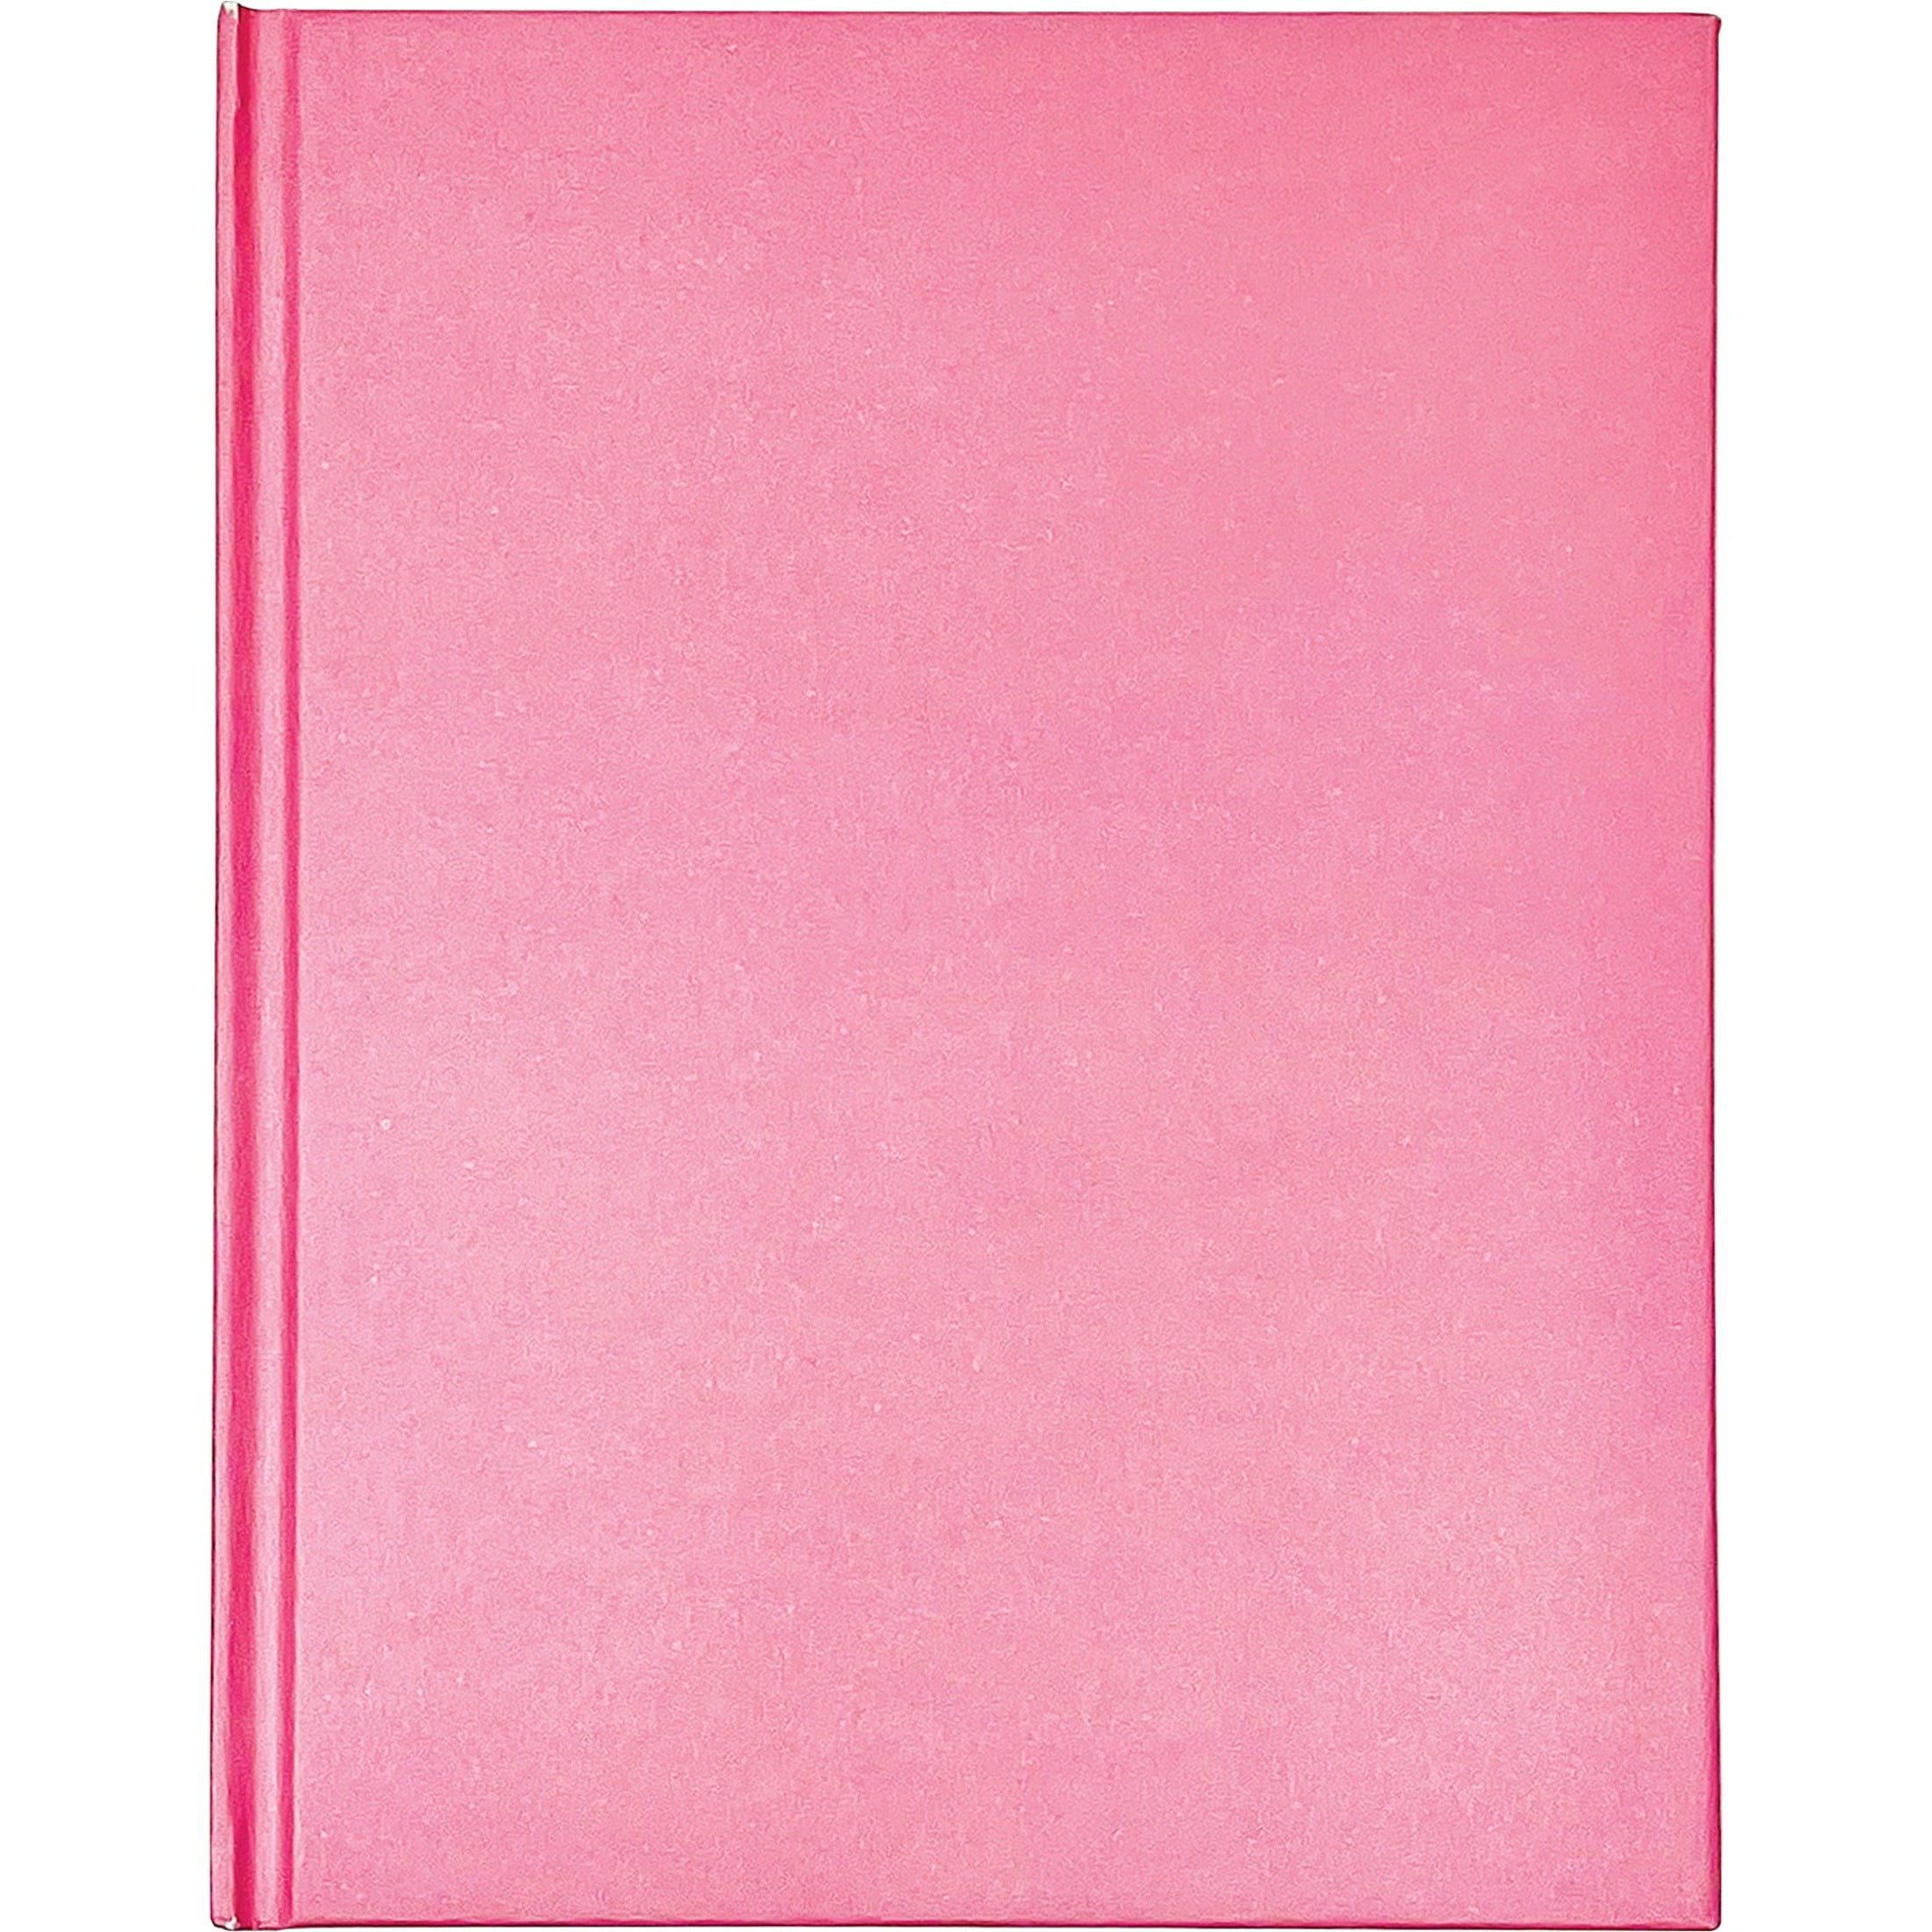 Ashley Productions 8 x 6 in. Blank Hardcover Book, Pink